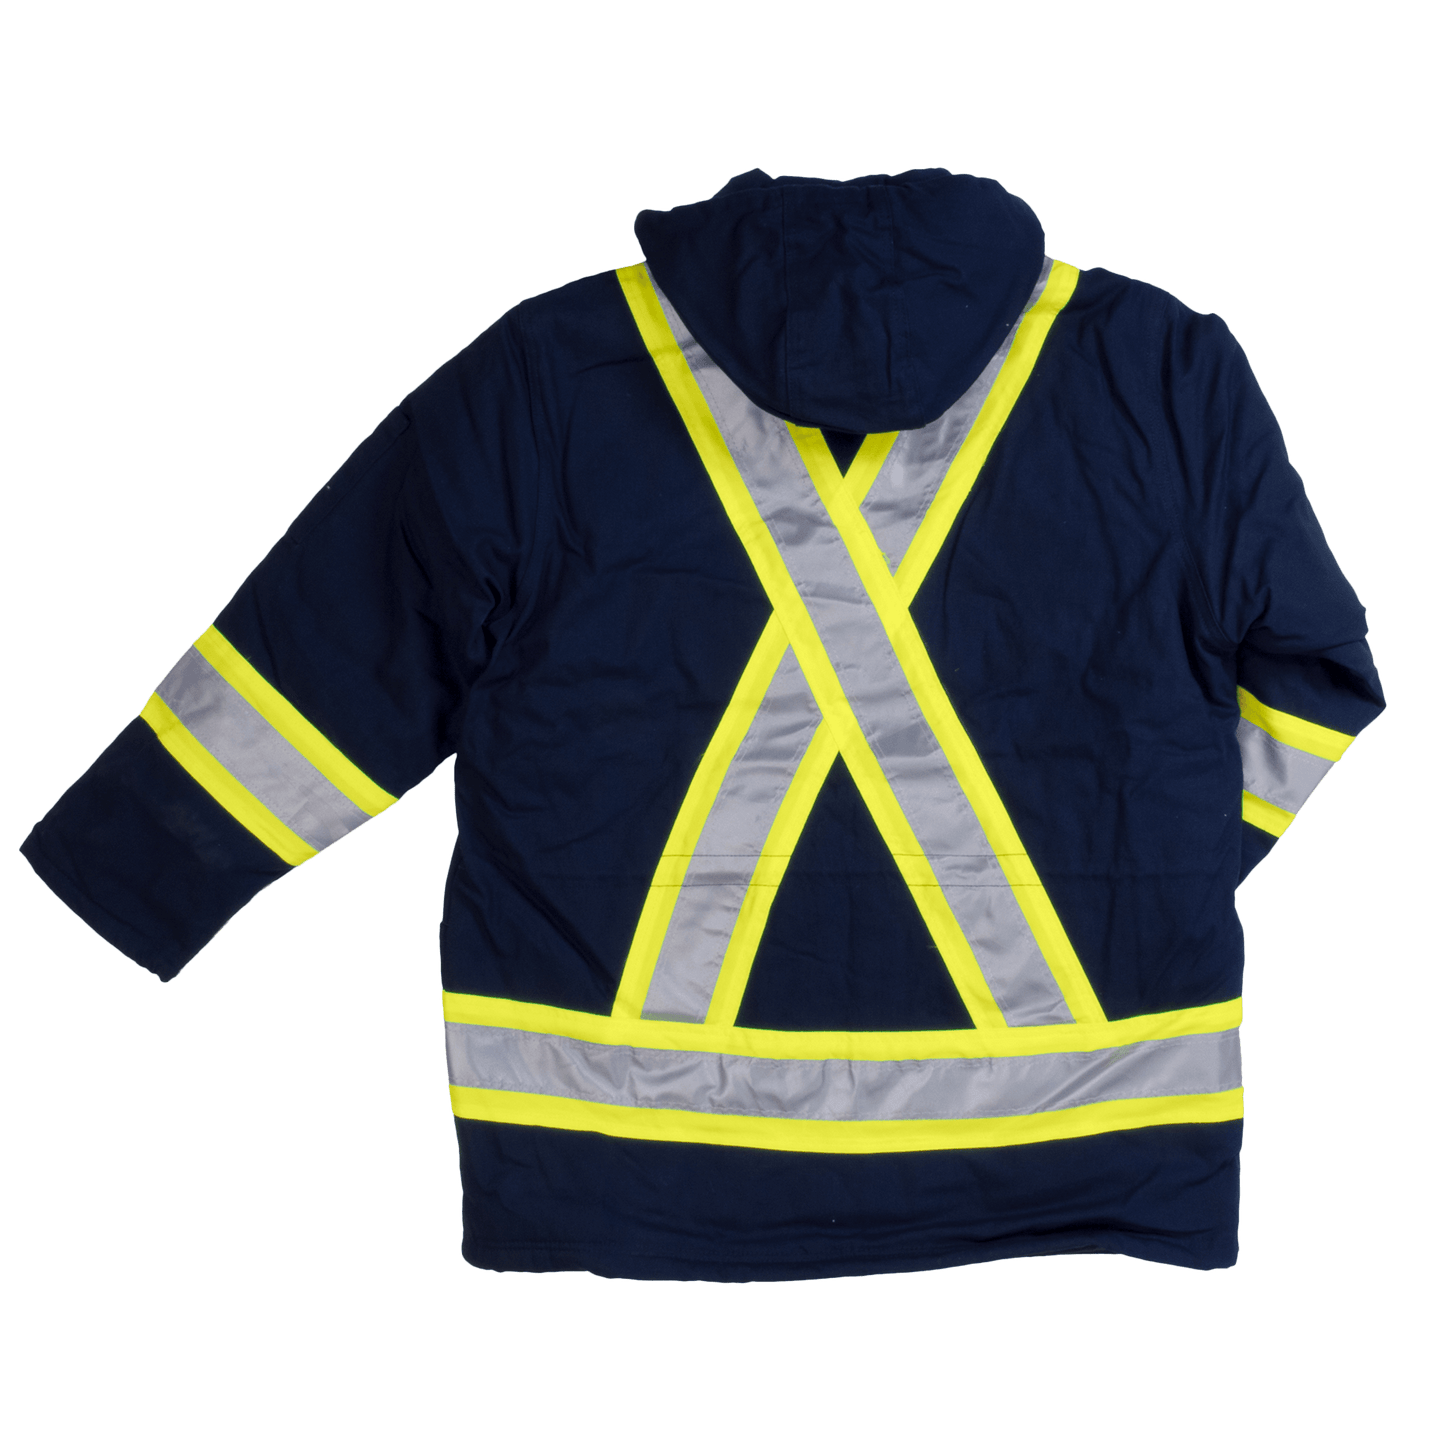 Tough Duck Fleece Lined Safety Jacket - S157 - Navy - back